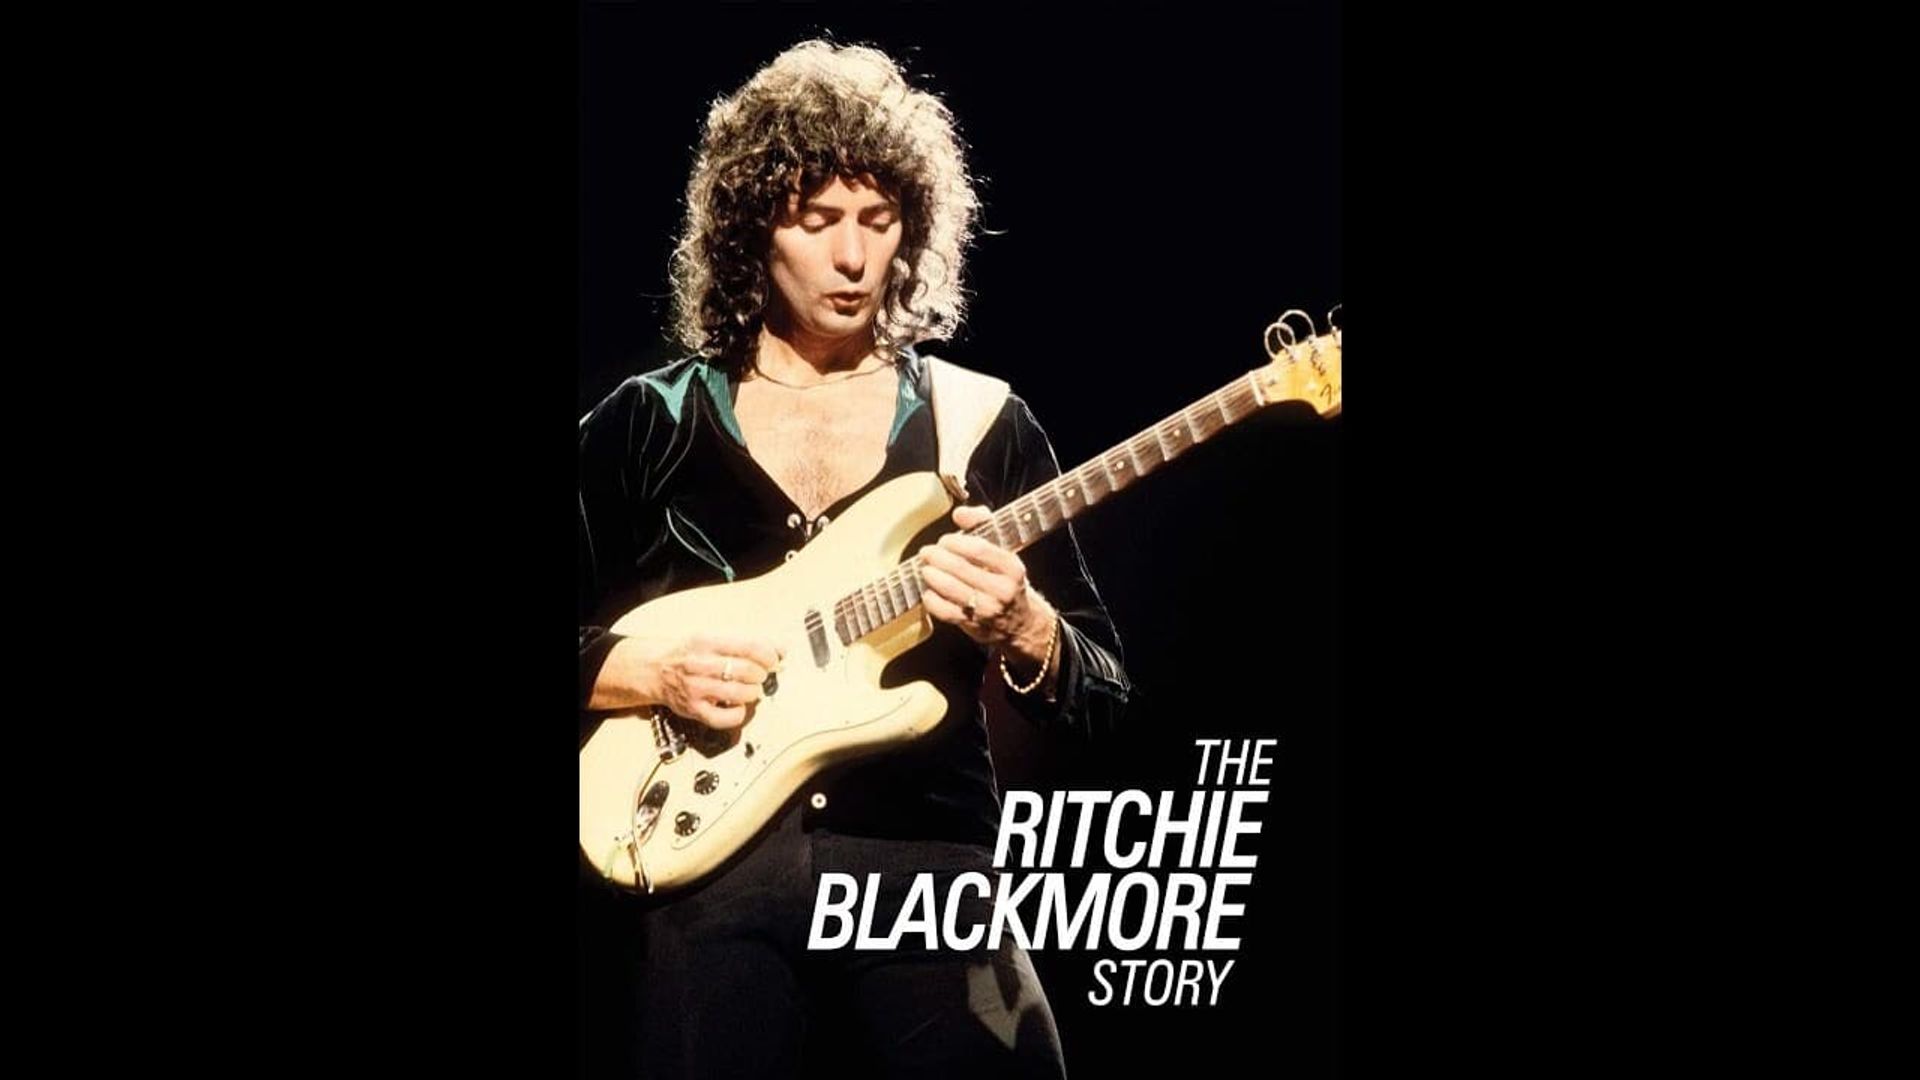 The Ritchie Blackmore Story background